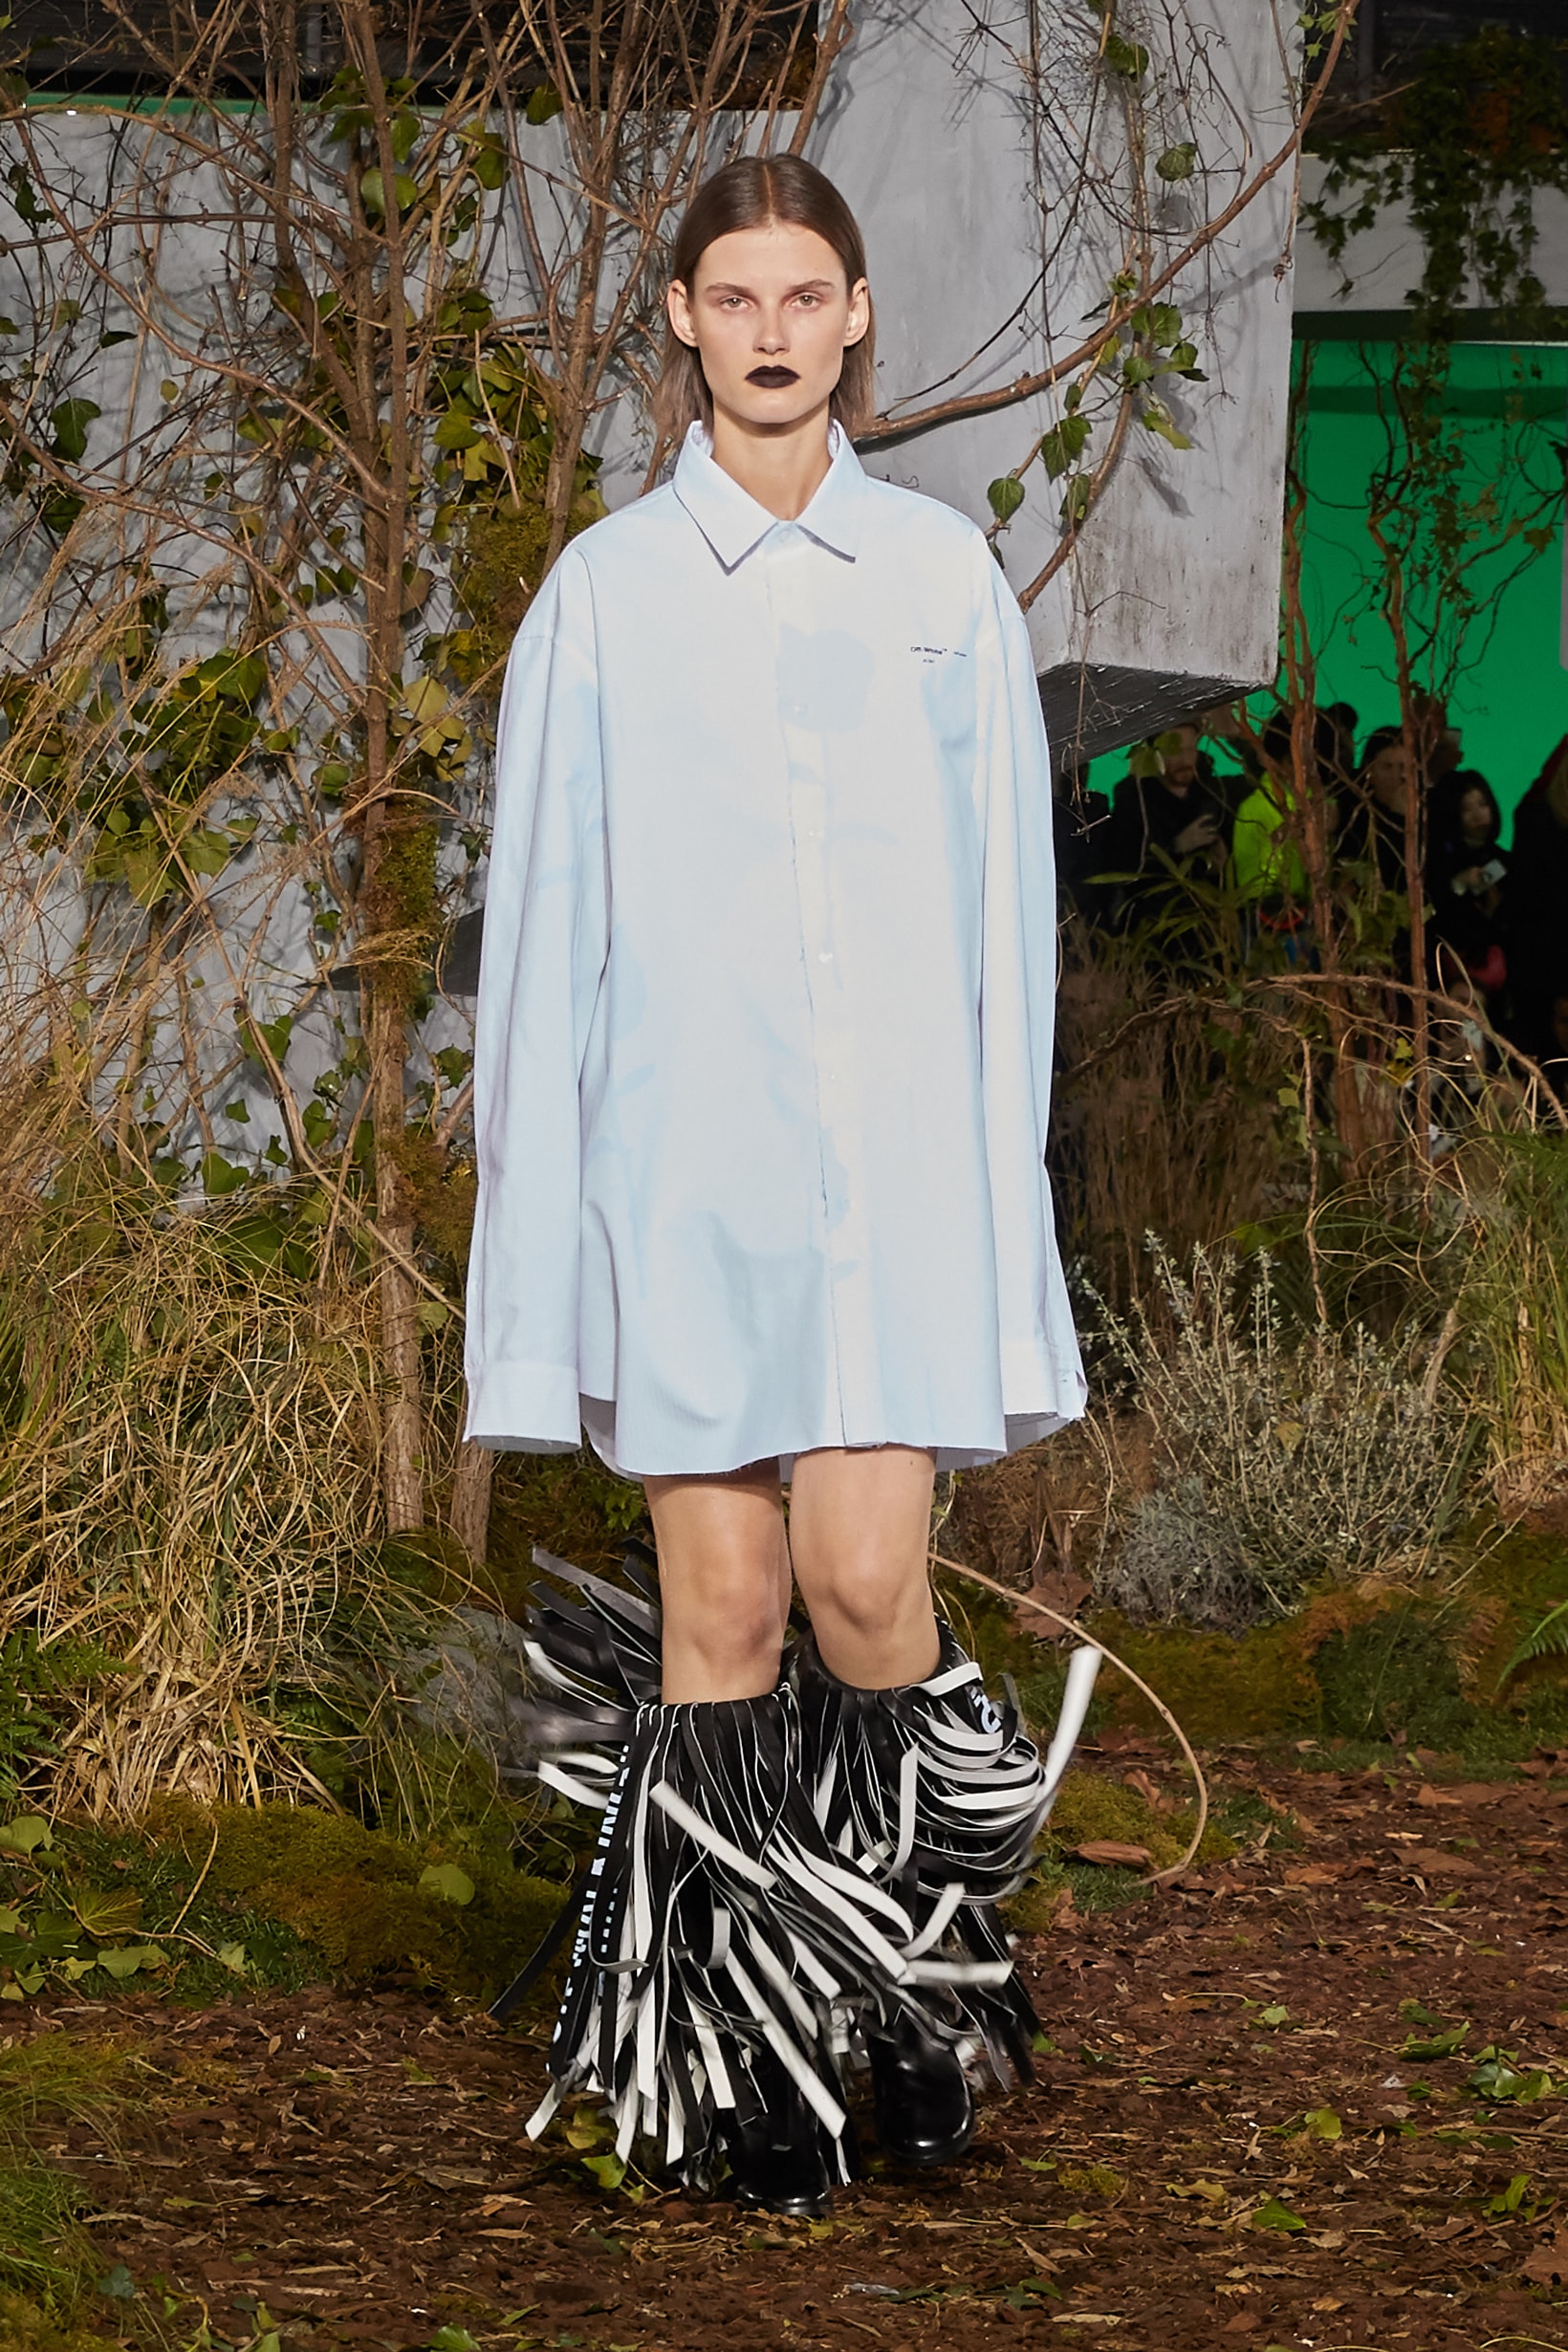 Off-White Virgil Abloh Fall Winter 2019 Paris Fashion Week Show Collection Backstage Long Sleeved Shirt White